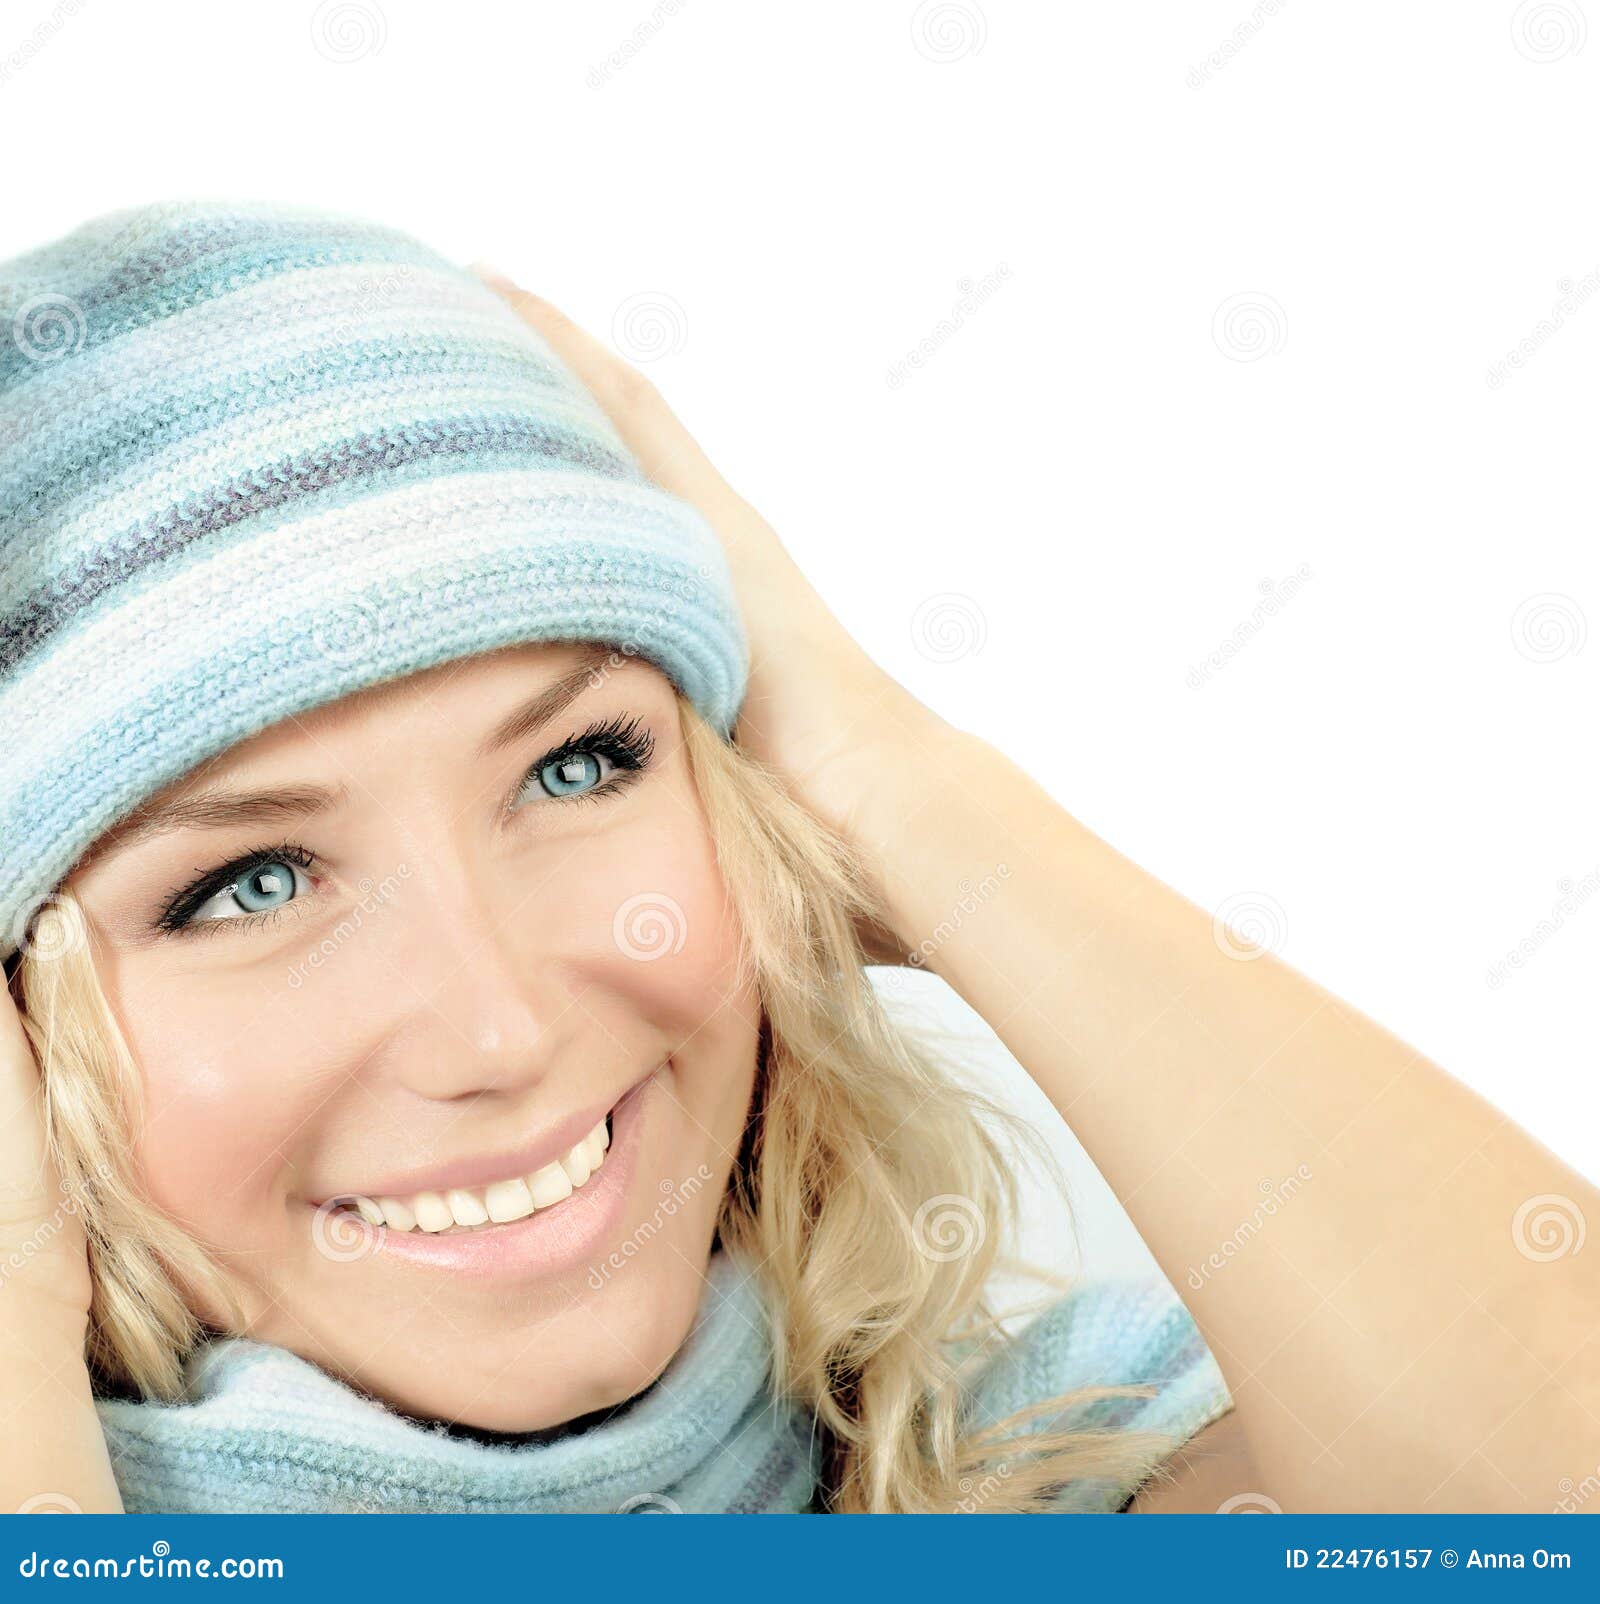 Beautiful Girl Warm Cozy Winter Clothes Stock Photo 2238411673